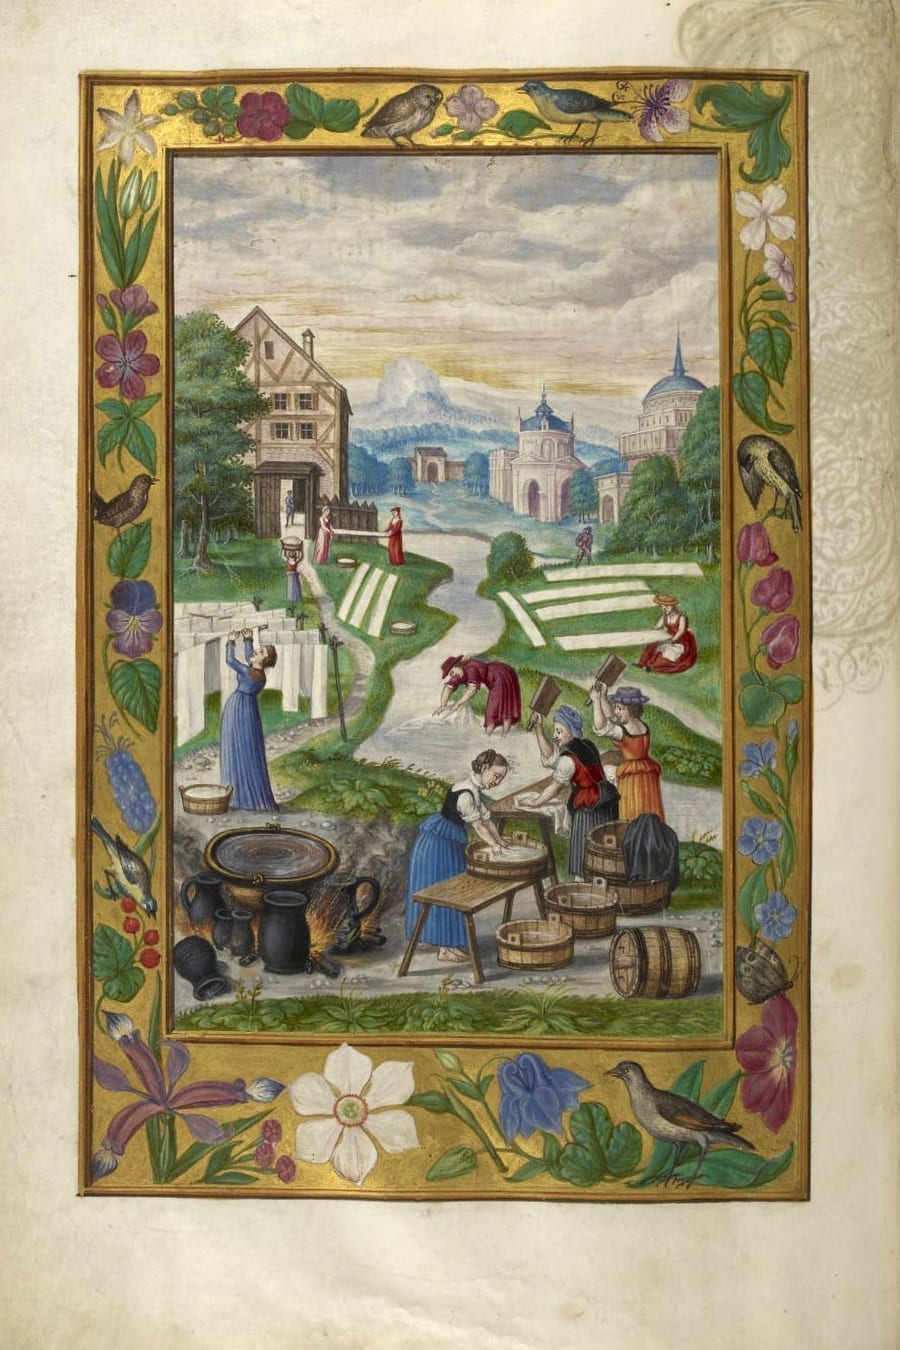 Illustration of women washing clothes from the Alchemical manuscript Splendor Solis